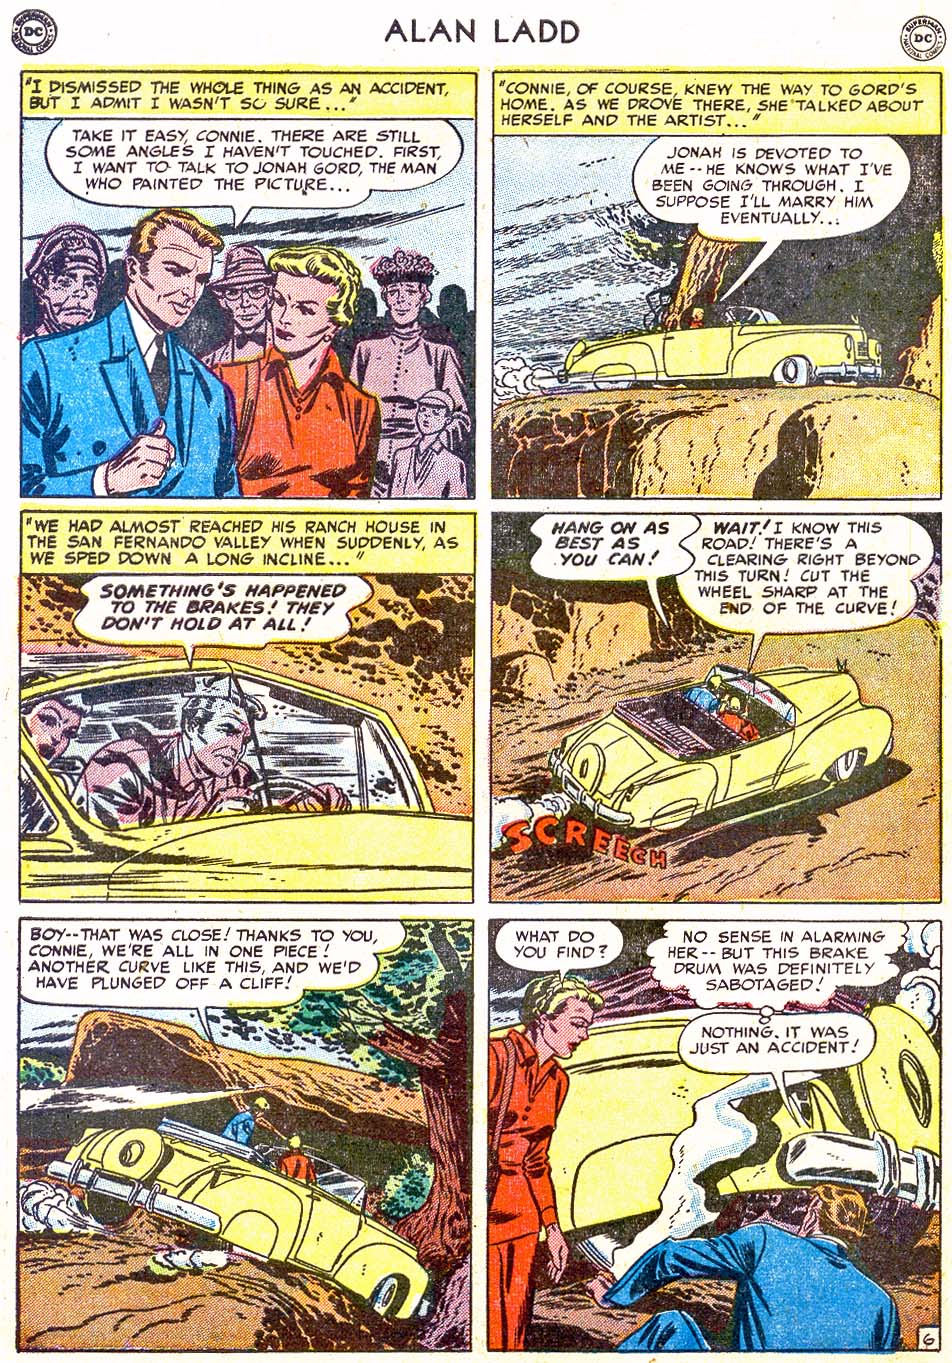 Adventures of Alan Ladd issue 6 - Page 8